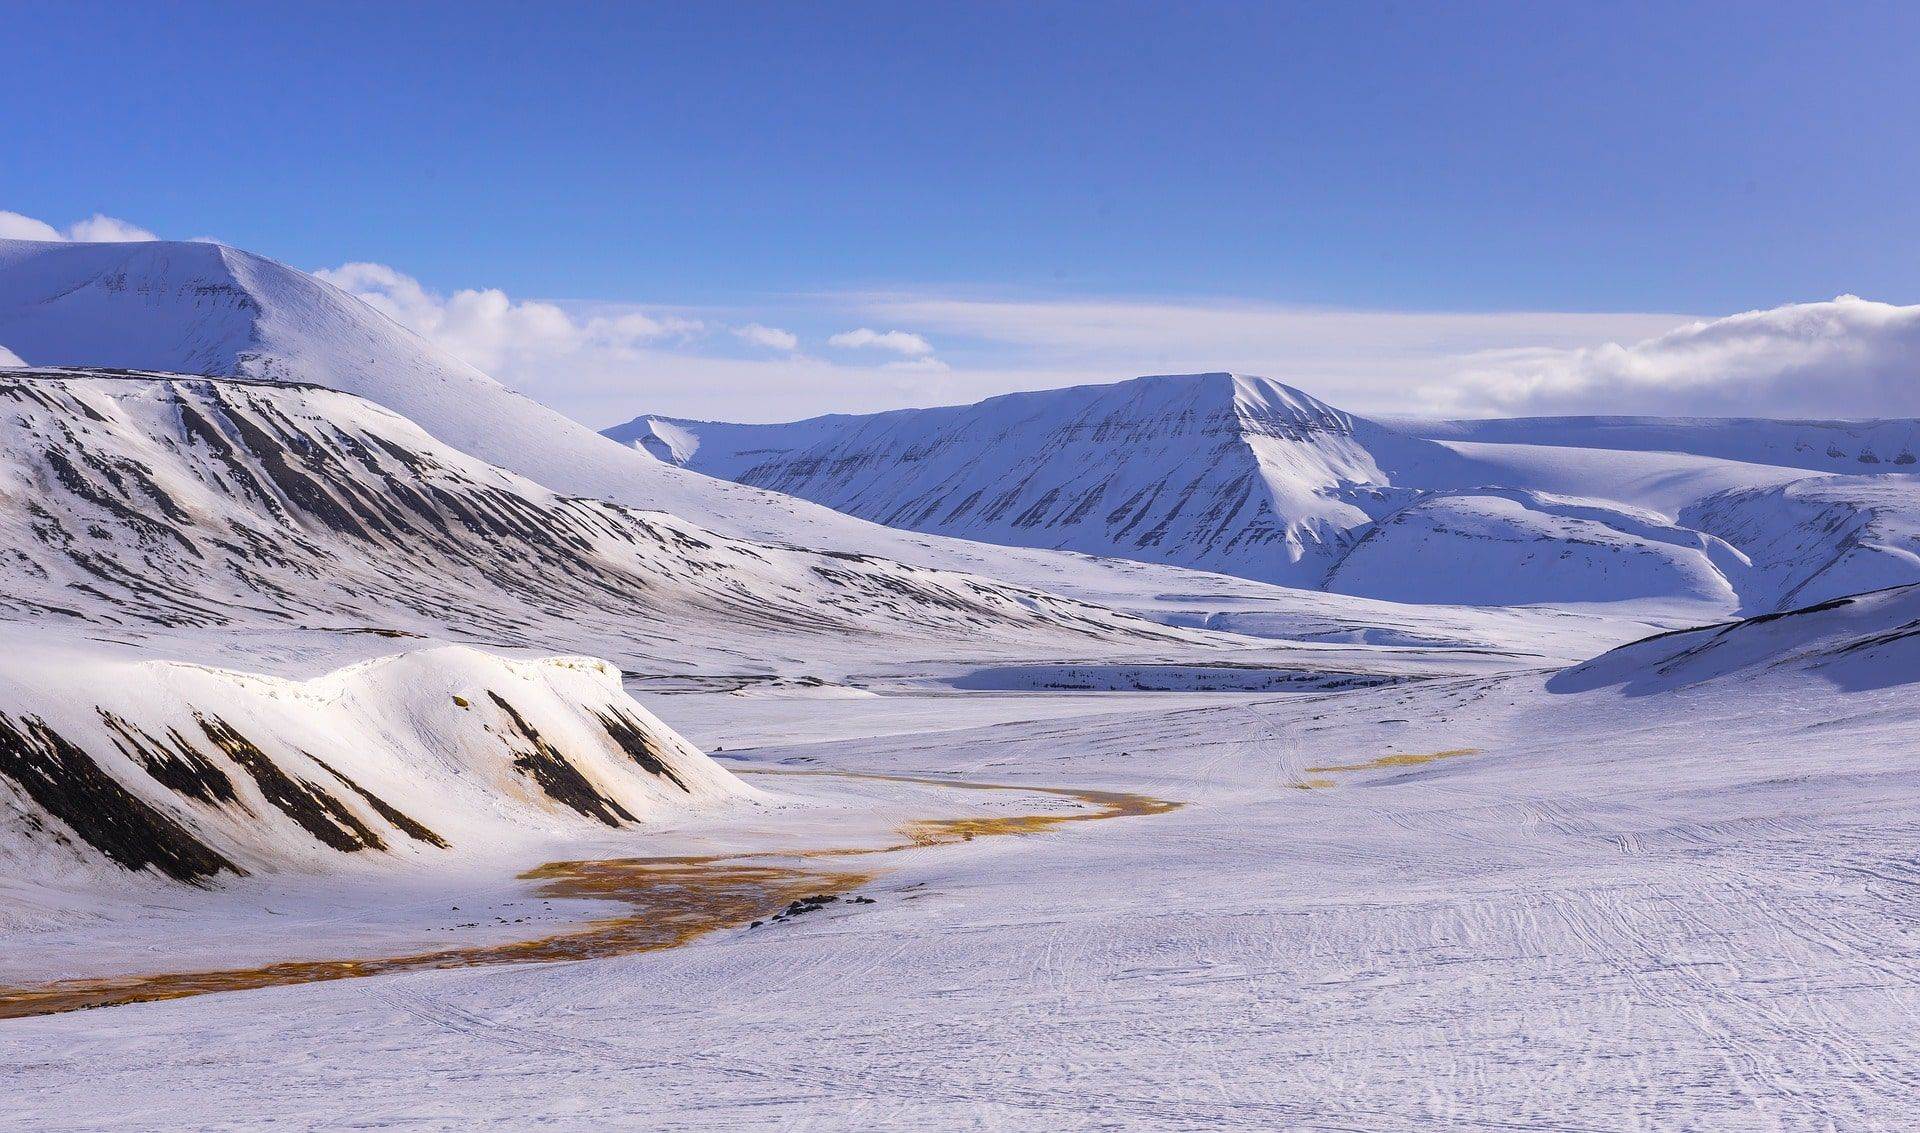 North of Norway is a beautiful island group, which is on the list of many nature lovers, Spitsbergen.